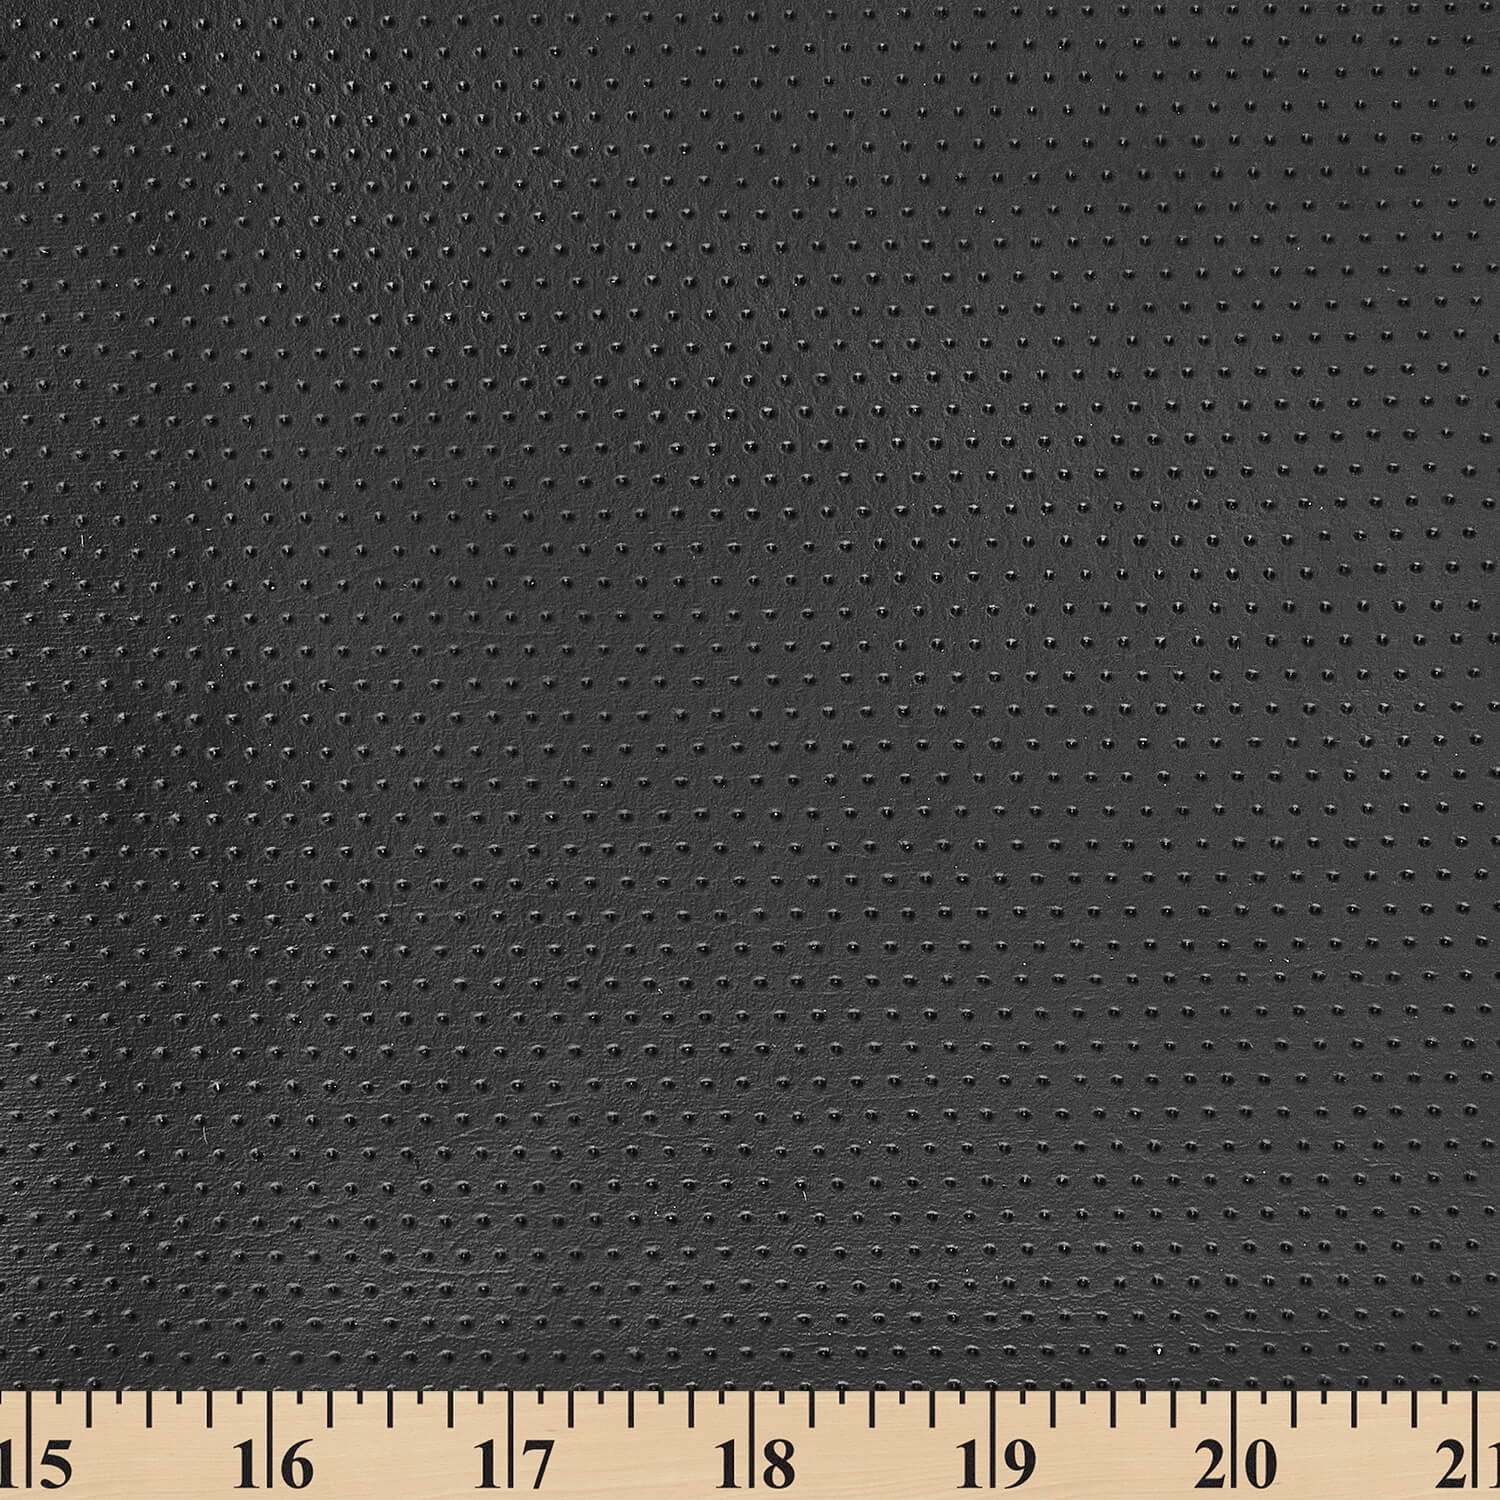 Dotted Stretch Vinyl Fabric Upholstery Perforated 54 Wide BTY Auto Home  Commercial (Charcoal) 